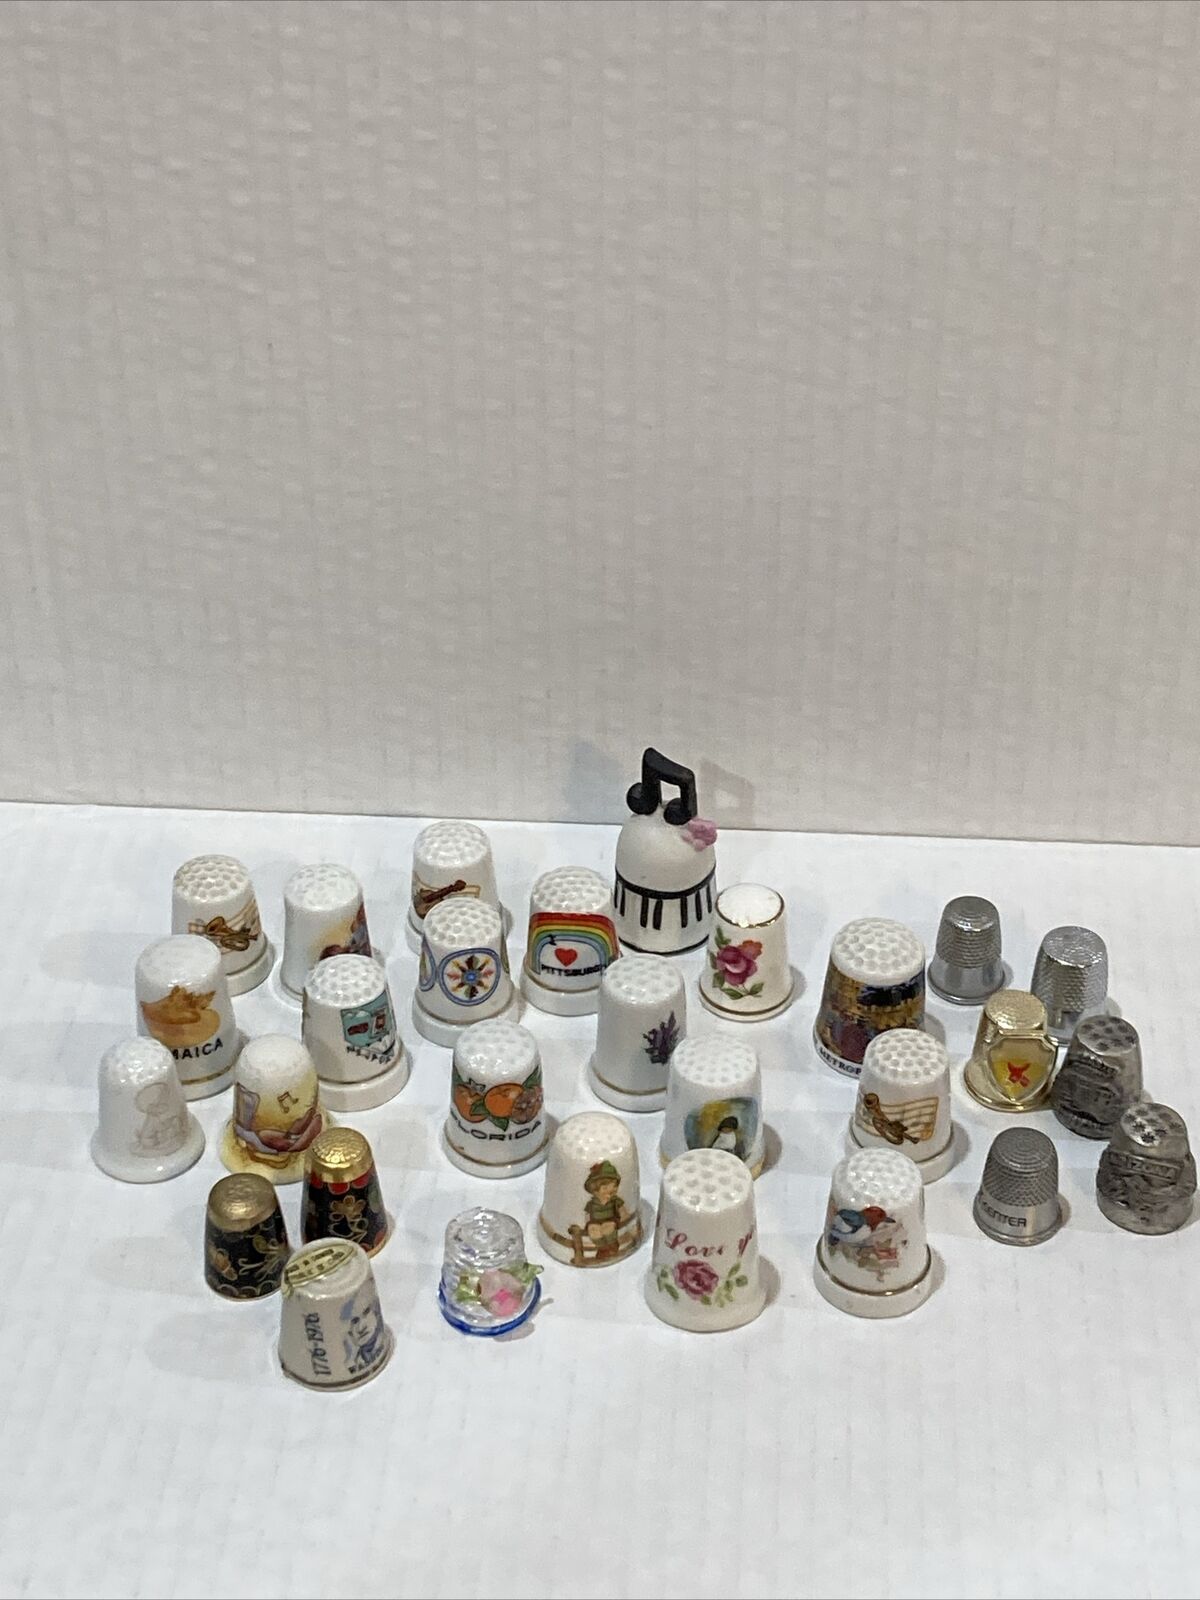 Lot Of 30 Vintage Thimbles Porcelain Ceramic And Metal States Music And More